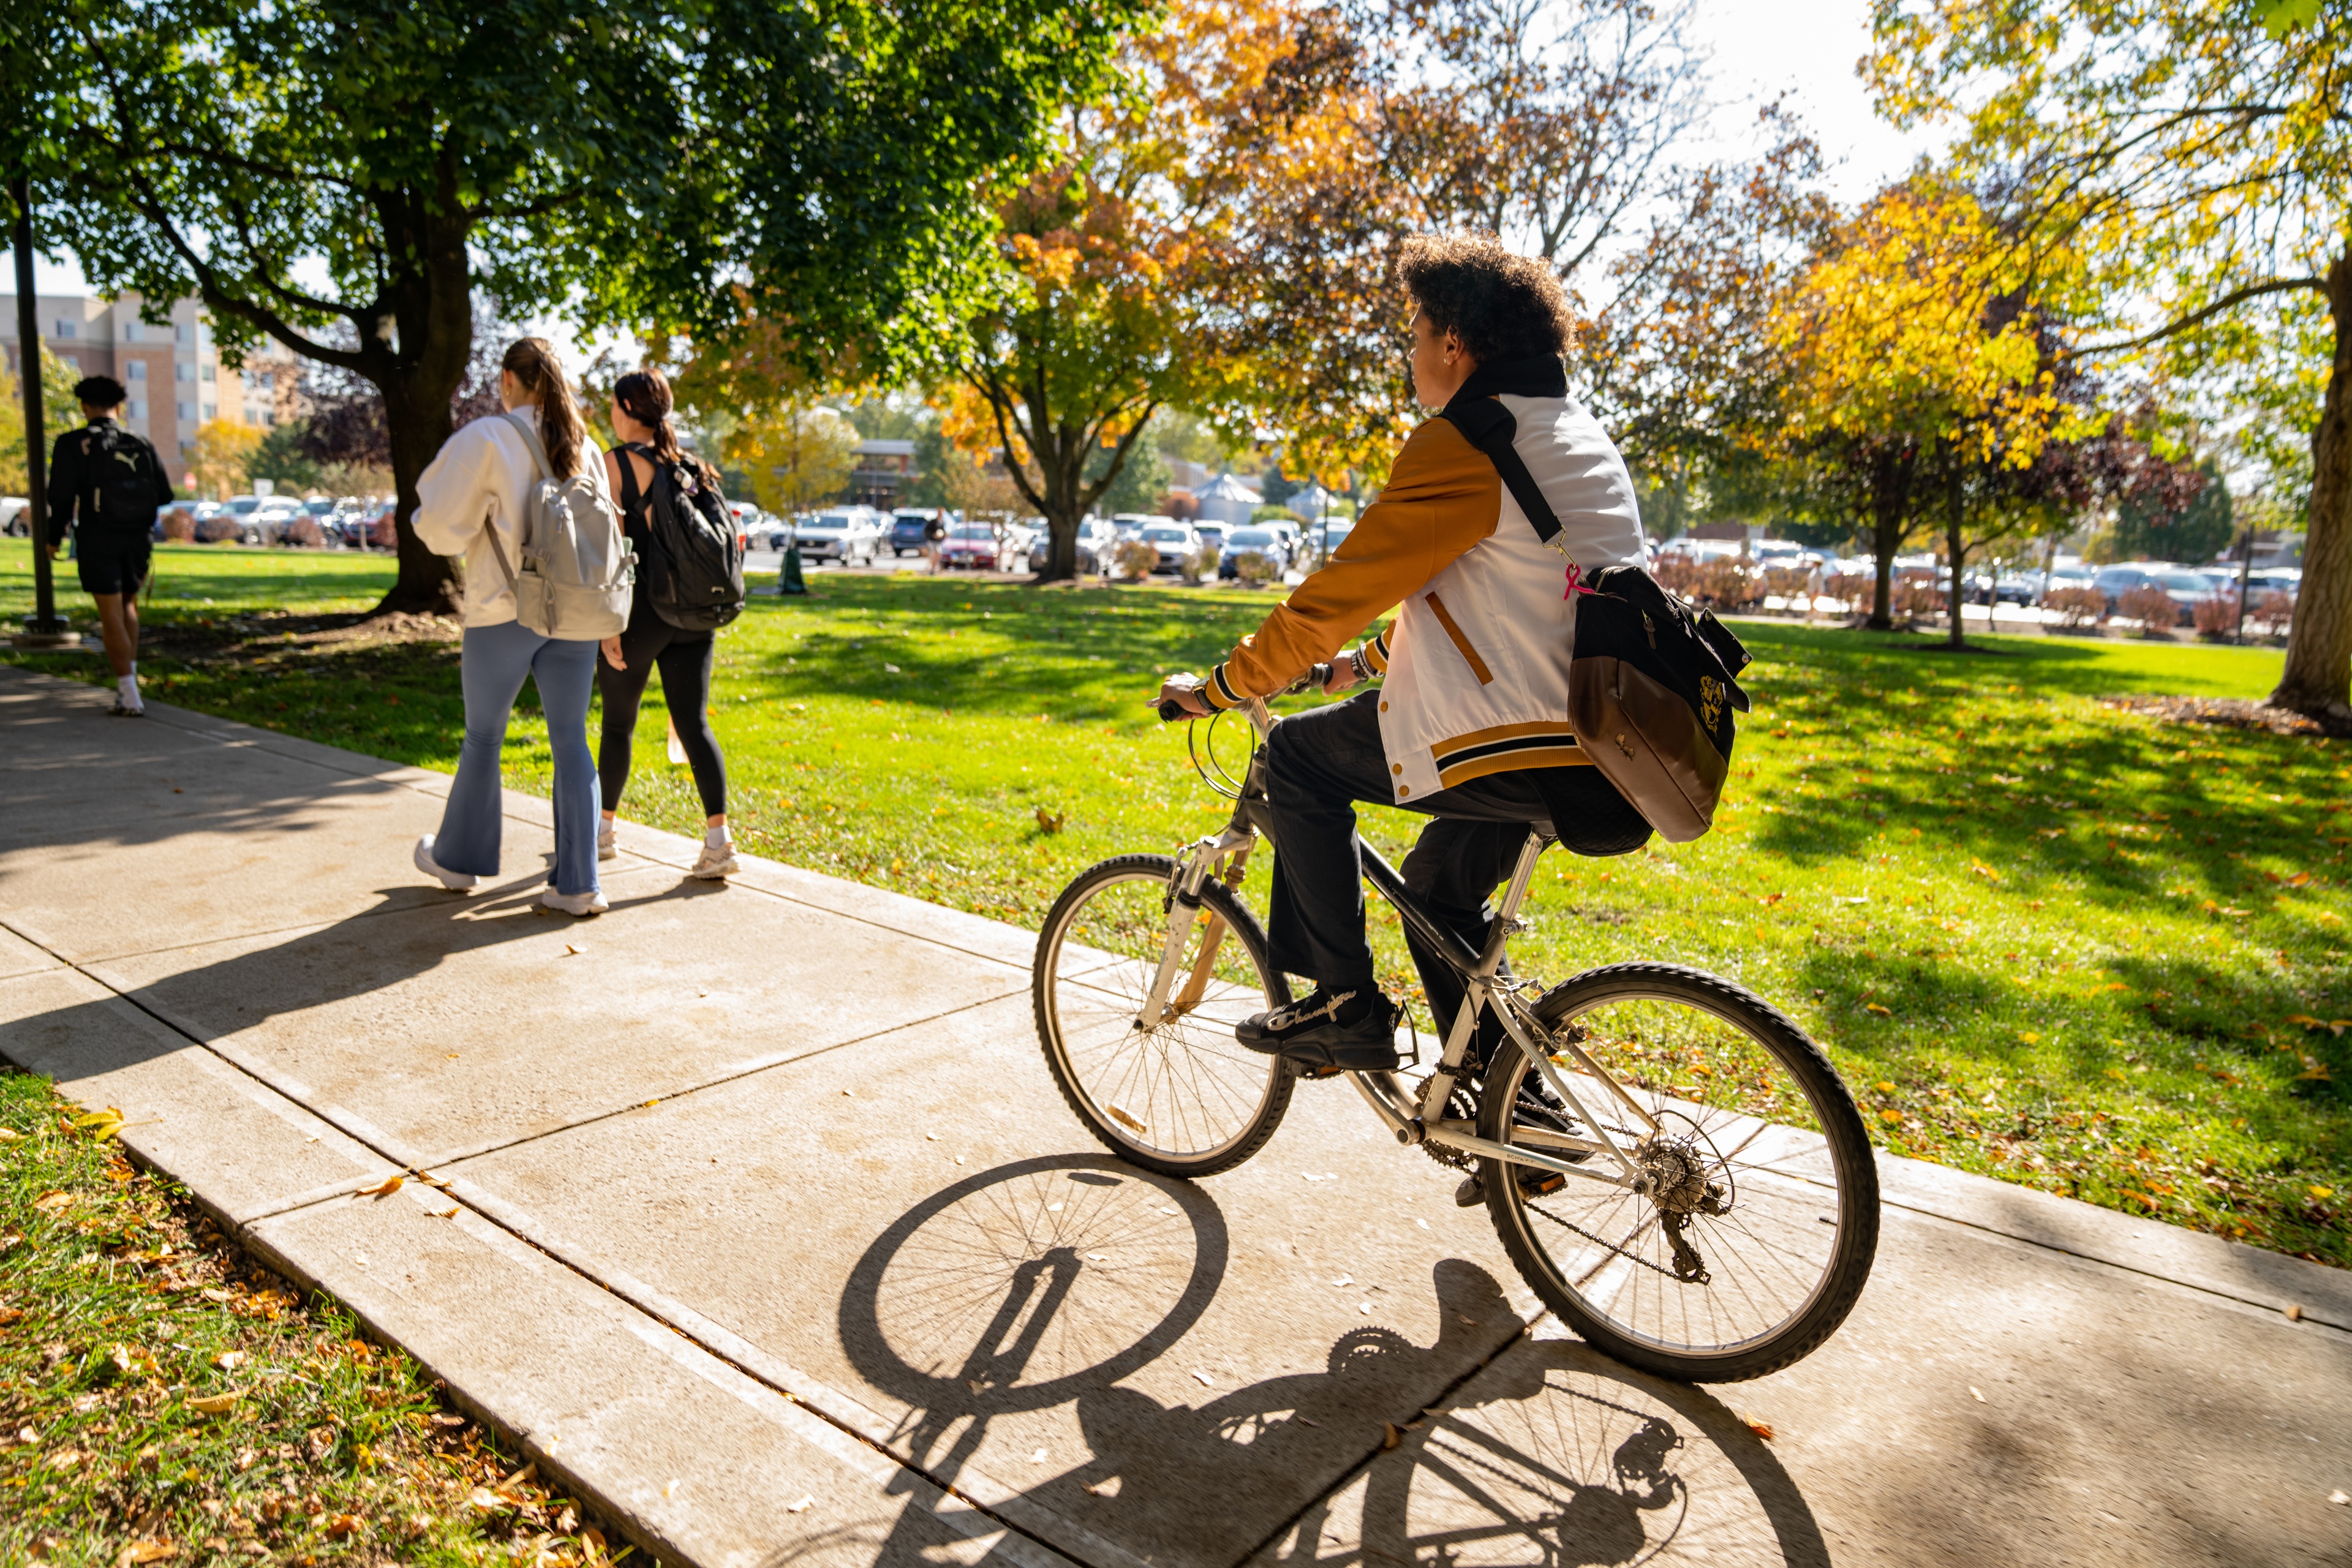 A person rides a bike on campus in the fall